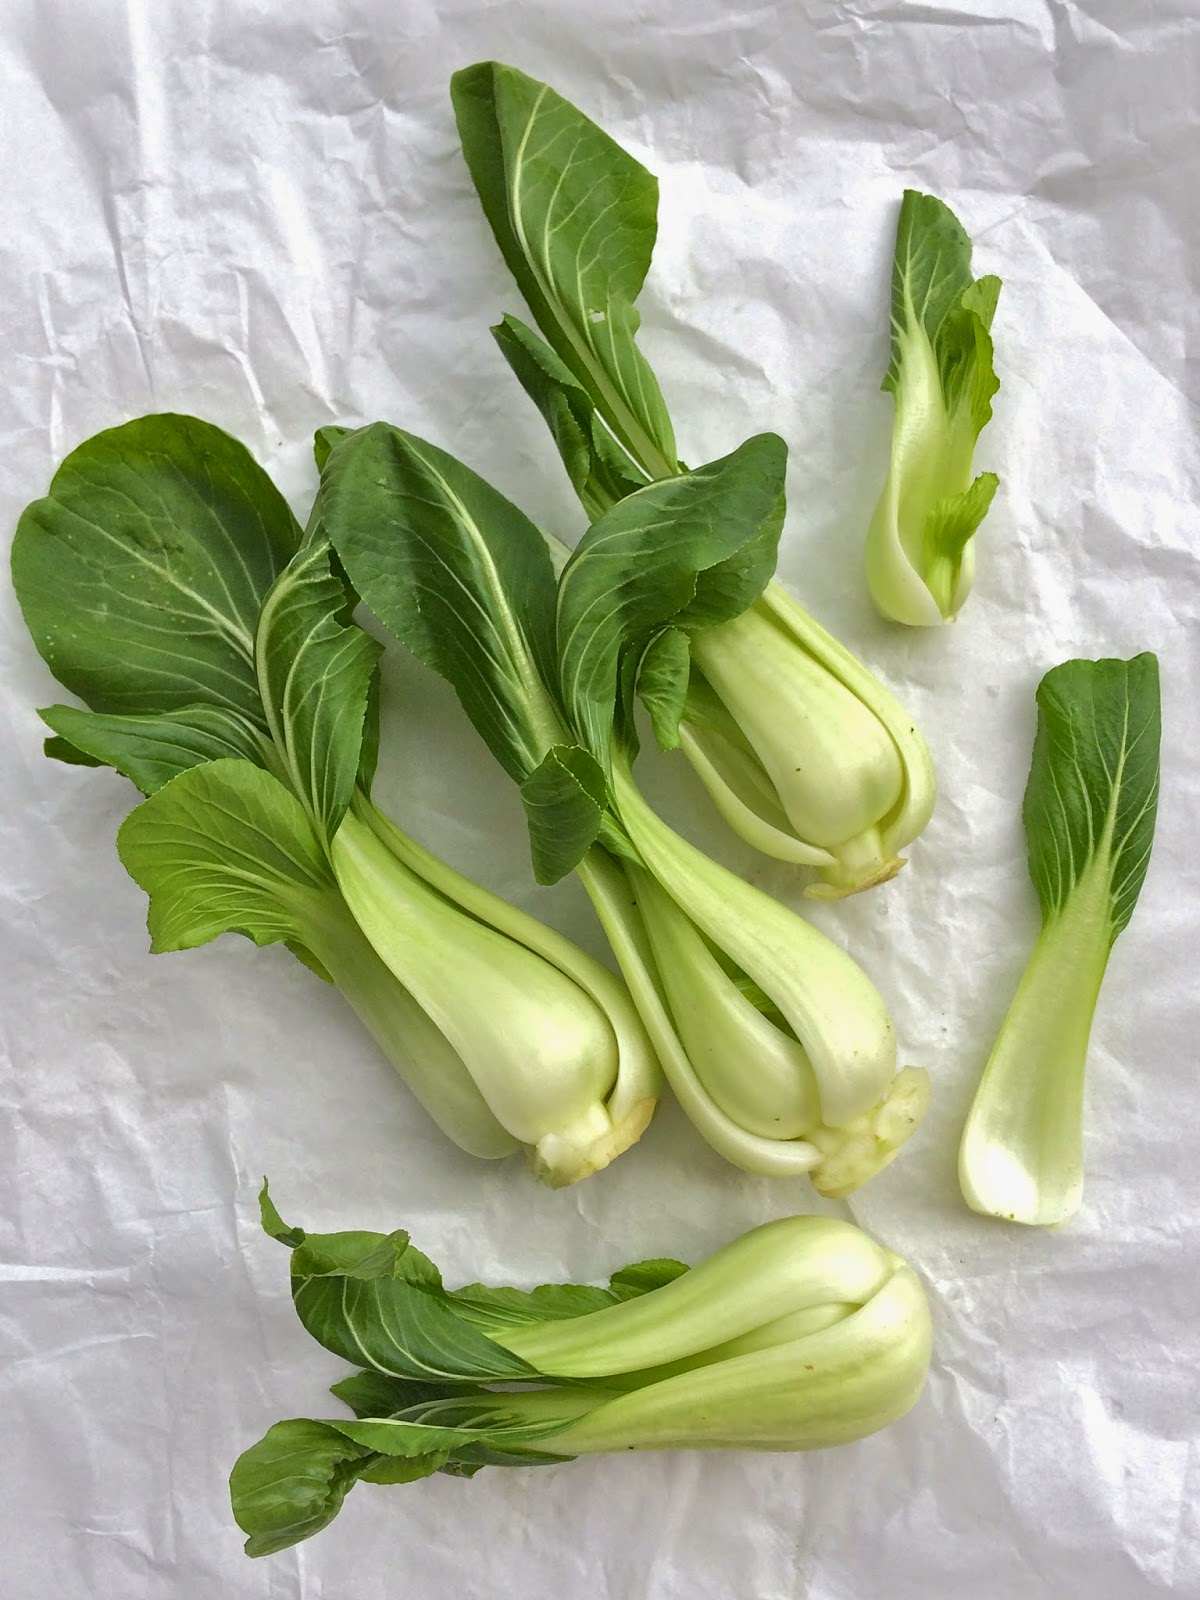 Passionately Raw! : Pak Choi Salad With Sweet And Sour Dressing